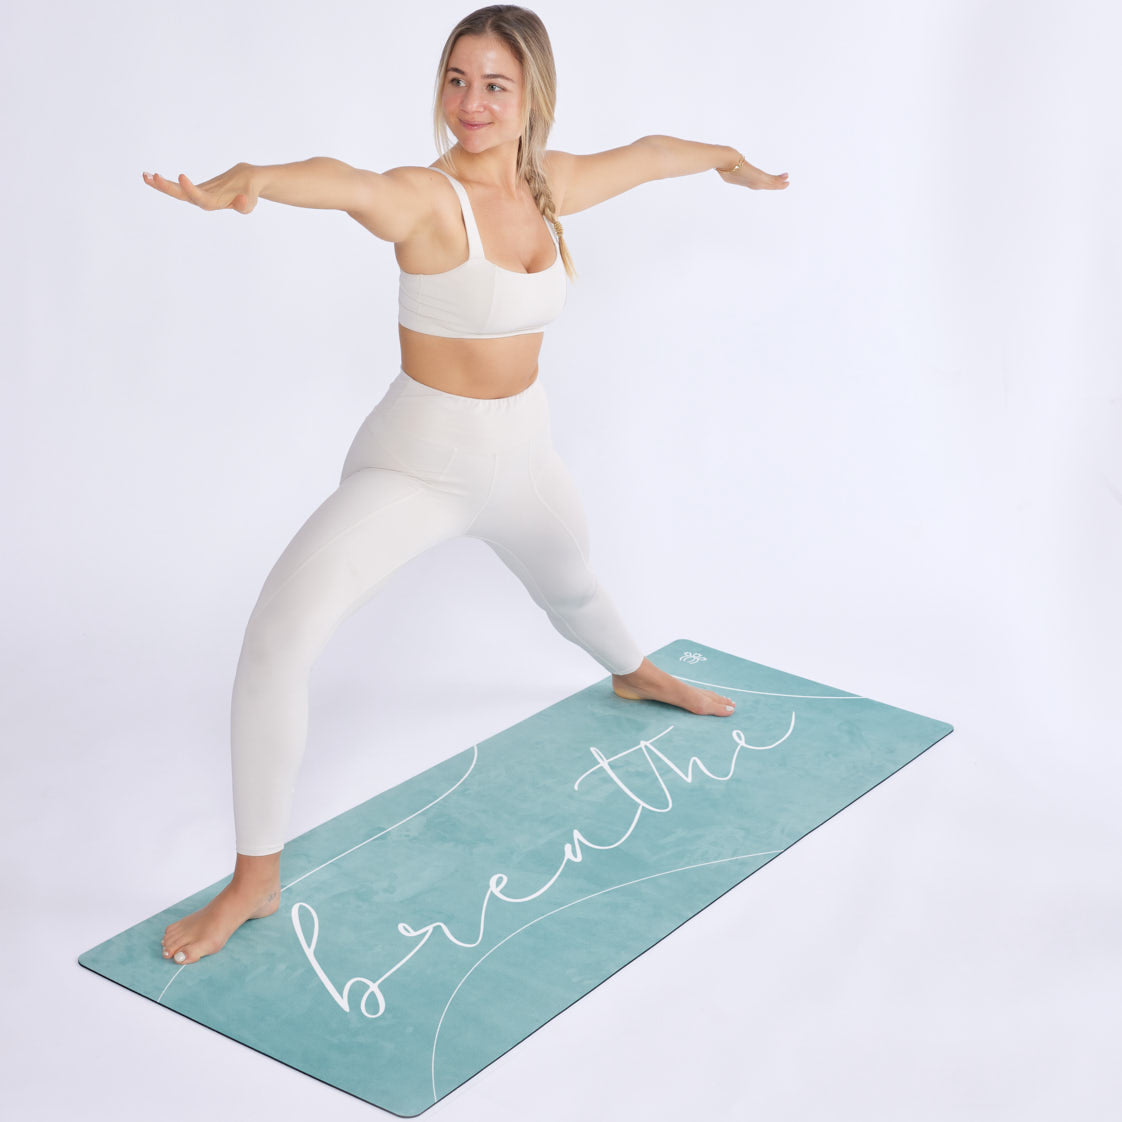 OMBRE LOGO Non-Slip Suede Top 4mm Thick Yoga Mat With Strap